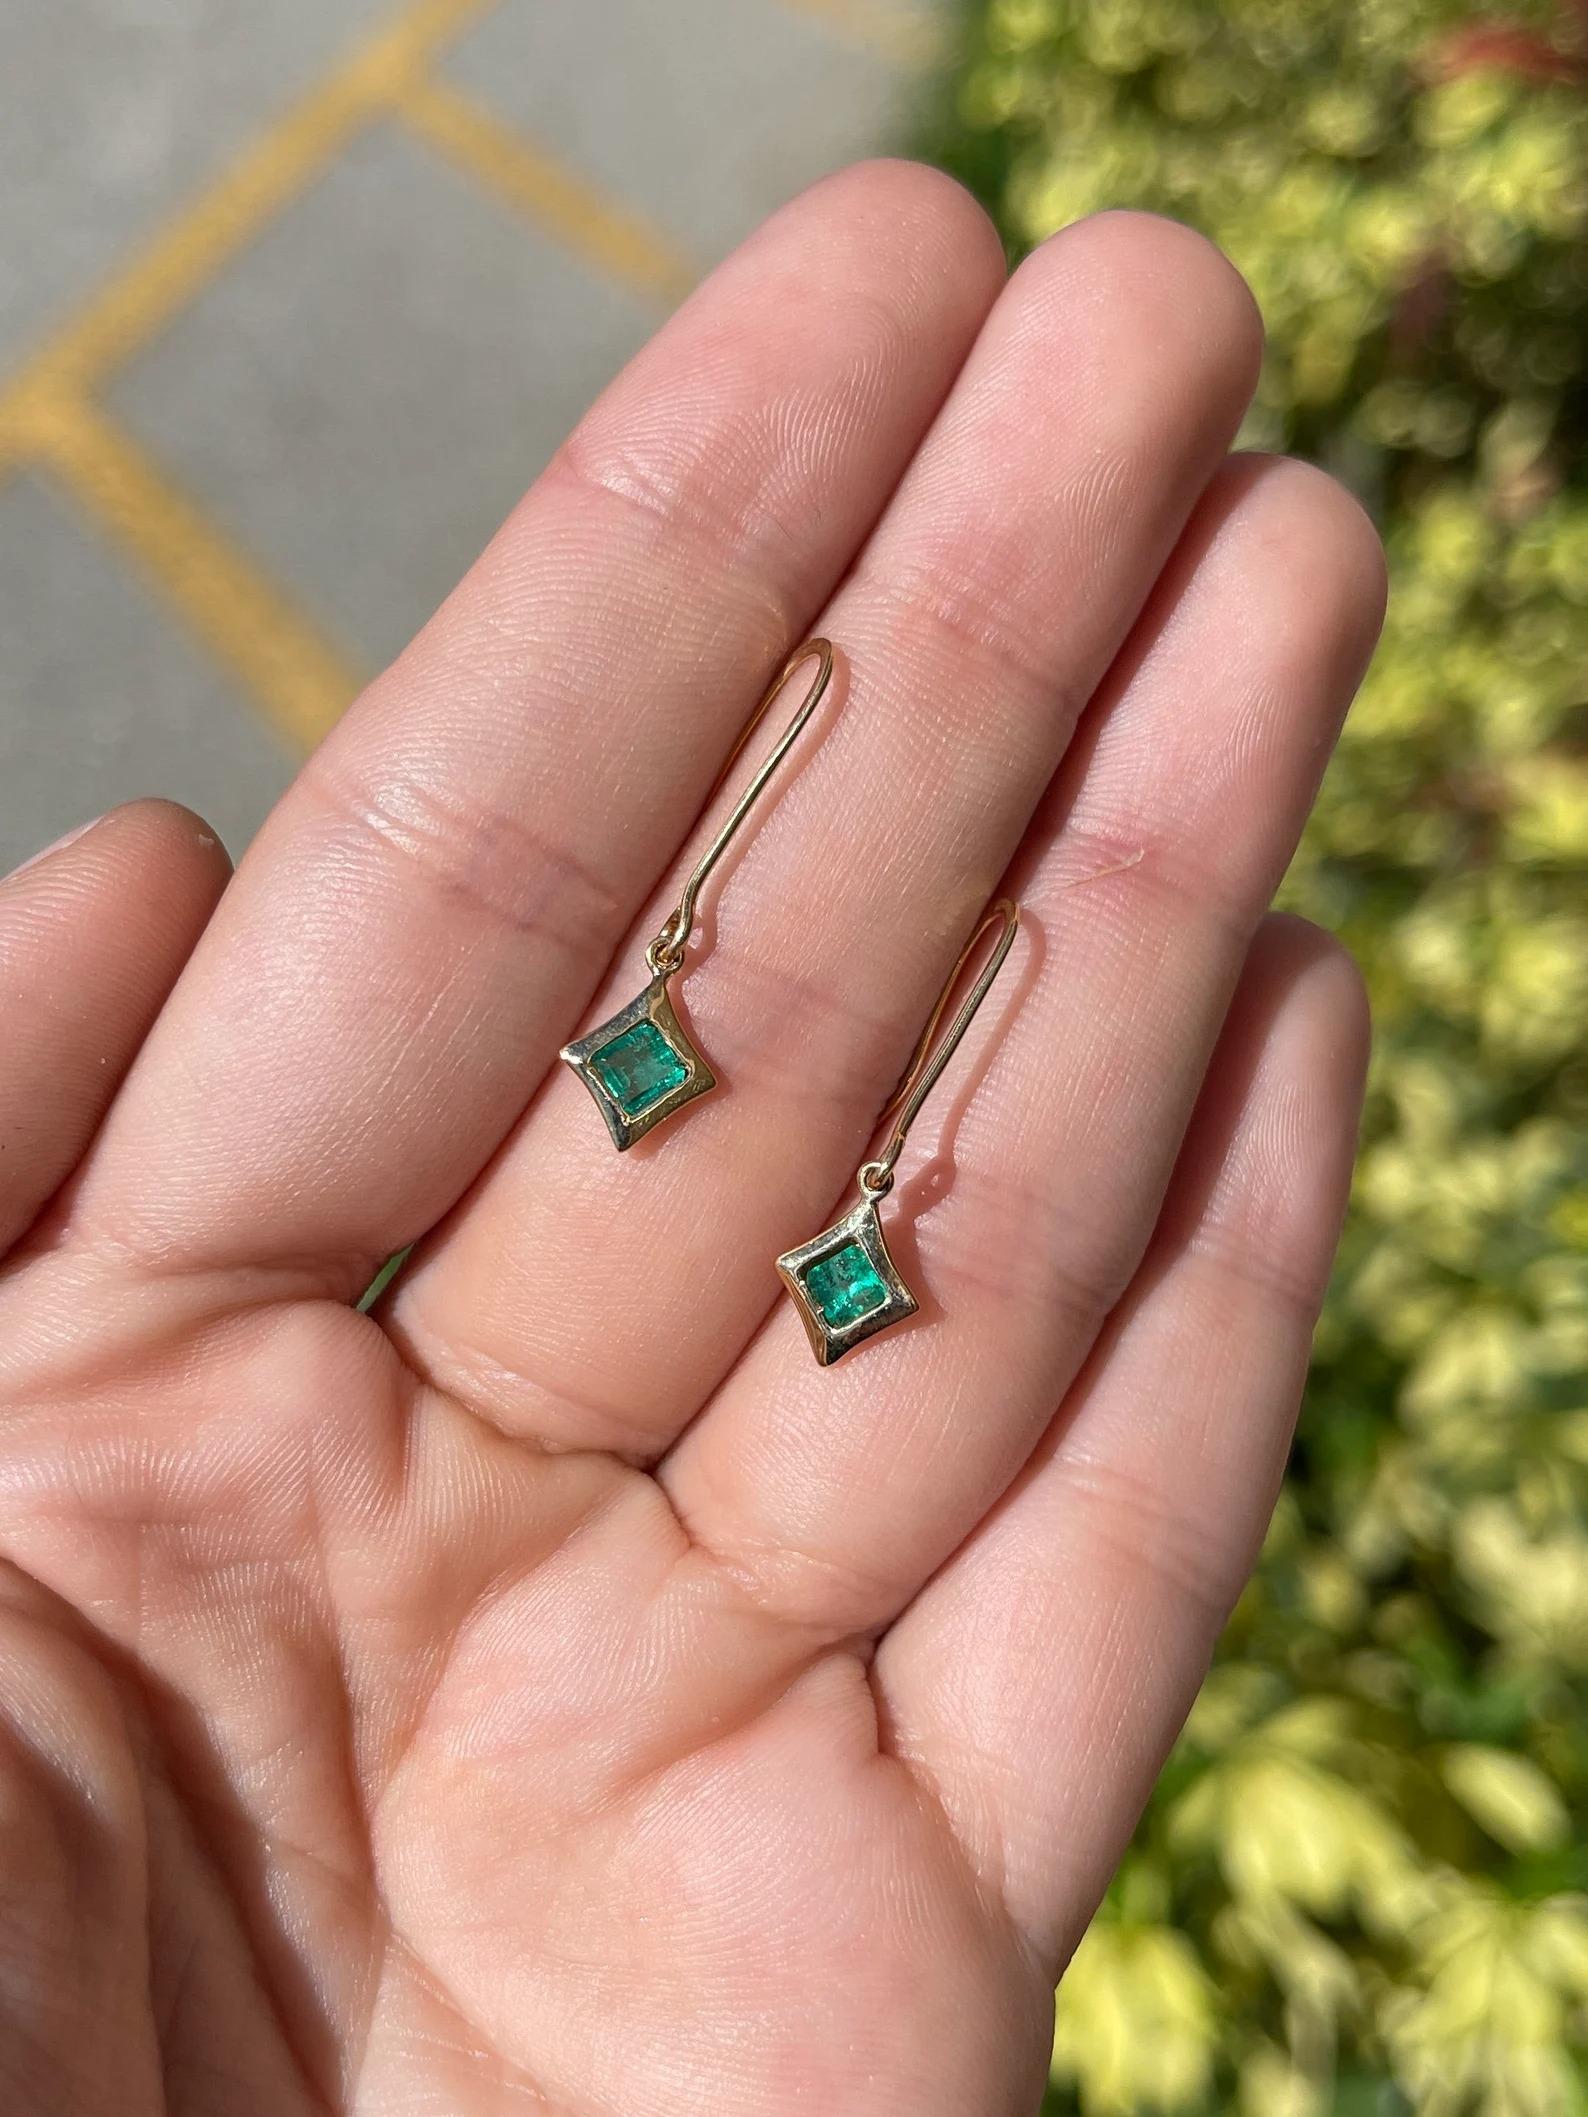 A stylish and modern pair of solitaire emerald dangle earrings. This dainty pair showcases two remarkable Asscher cut Colombian emeralds, bezel set within a solid 14K yellow gold dangles.

Setting Style: Bezel
Setting Material: 14K Yellow